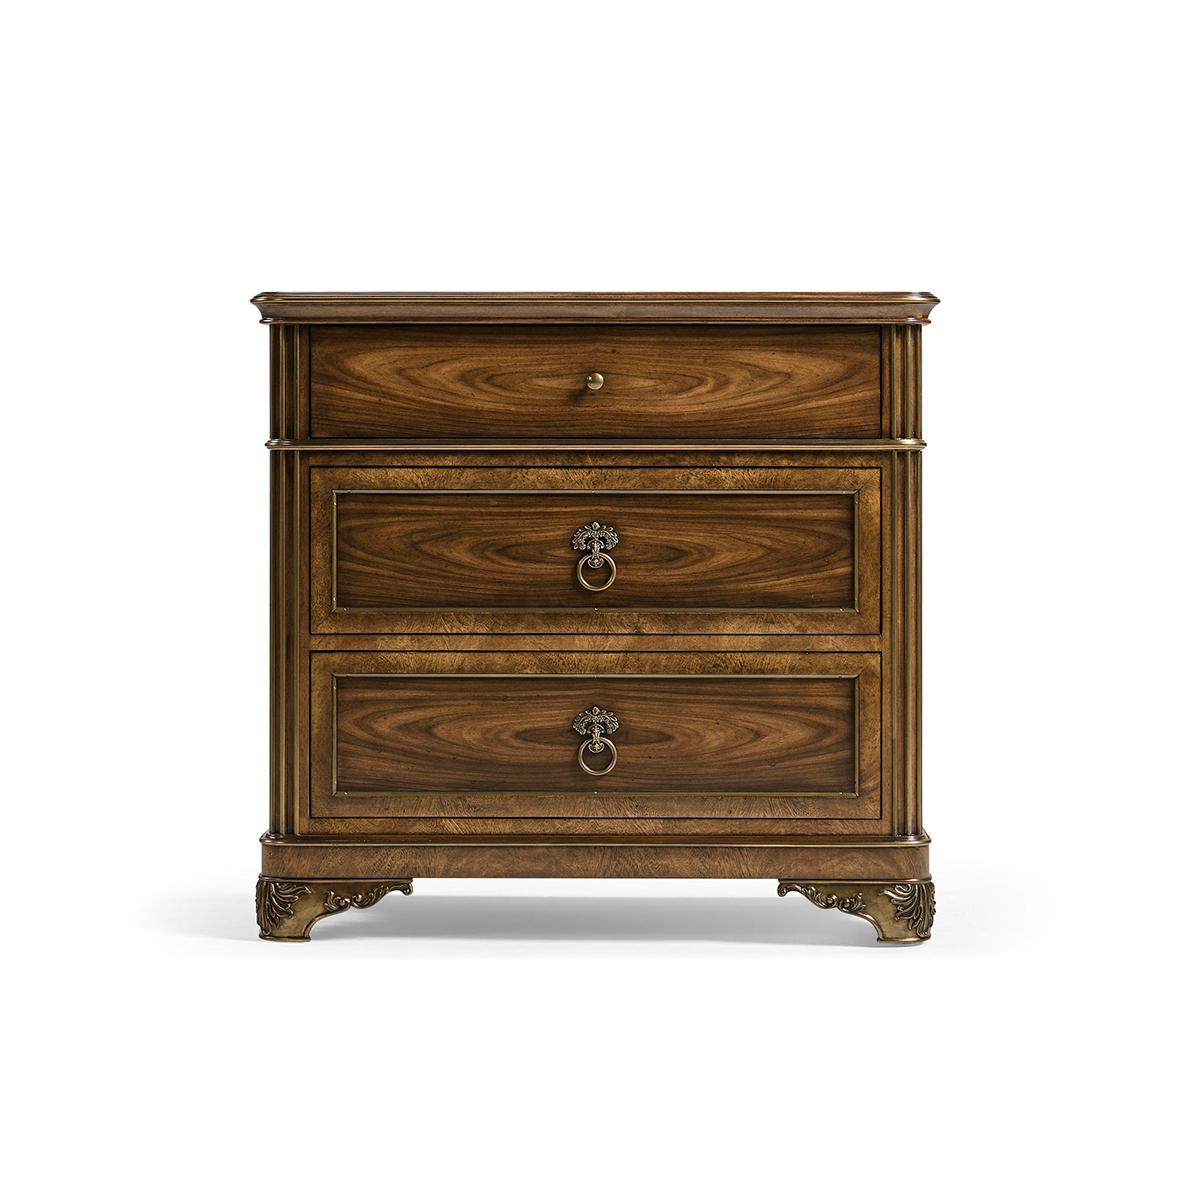 Drawing inspiration from classical aesthetics, this chest exudes sophistication with its classic silhouette and refined proportions.


The nightstand is constructed with mahogany and exotic woods. Elevating its allure, it also features brass inlay